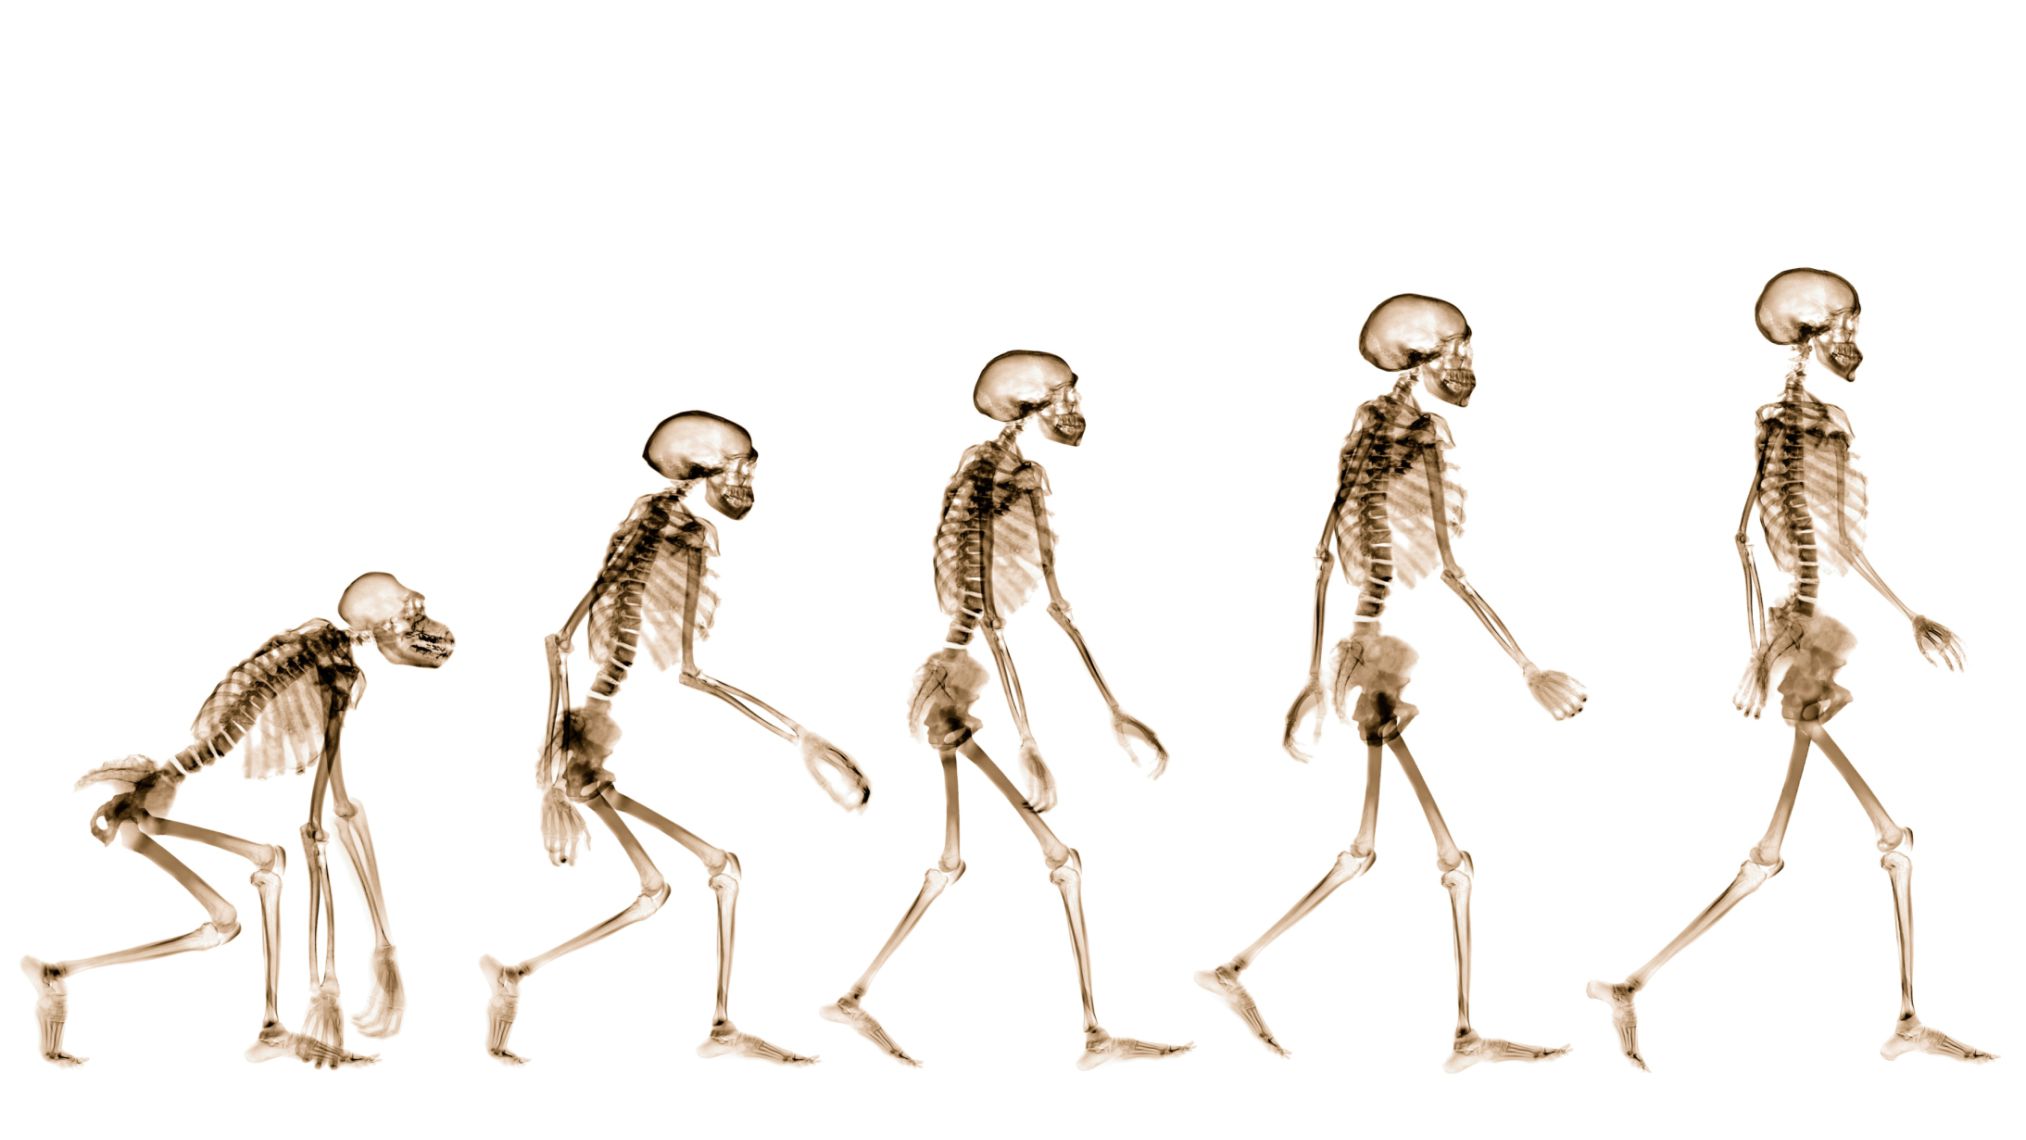 Why did bipedalism evolve in humans?